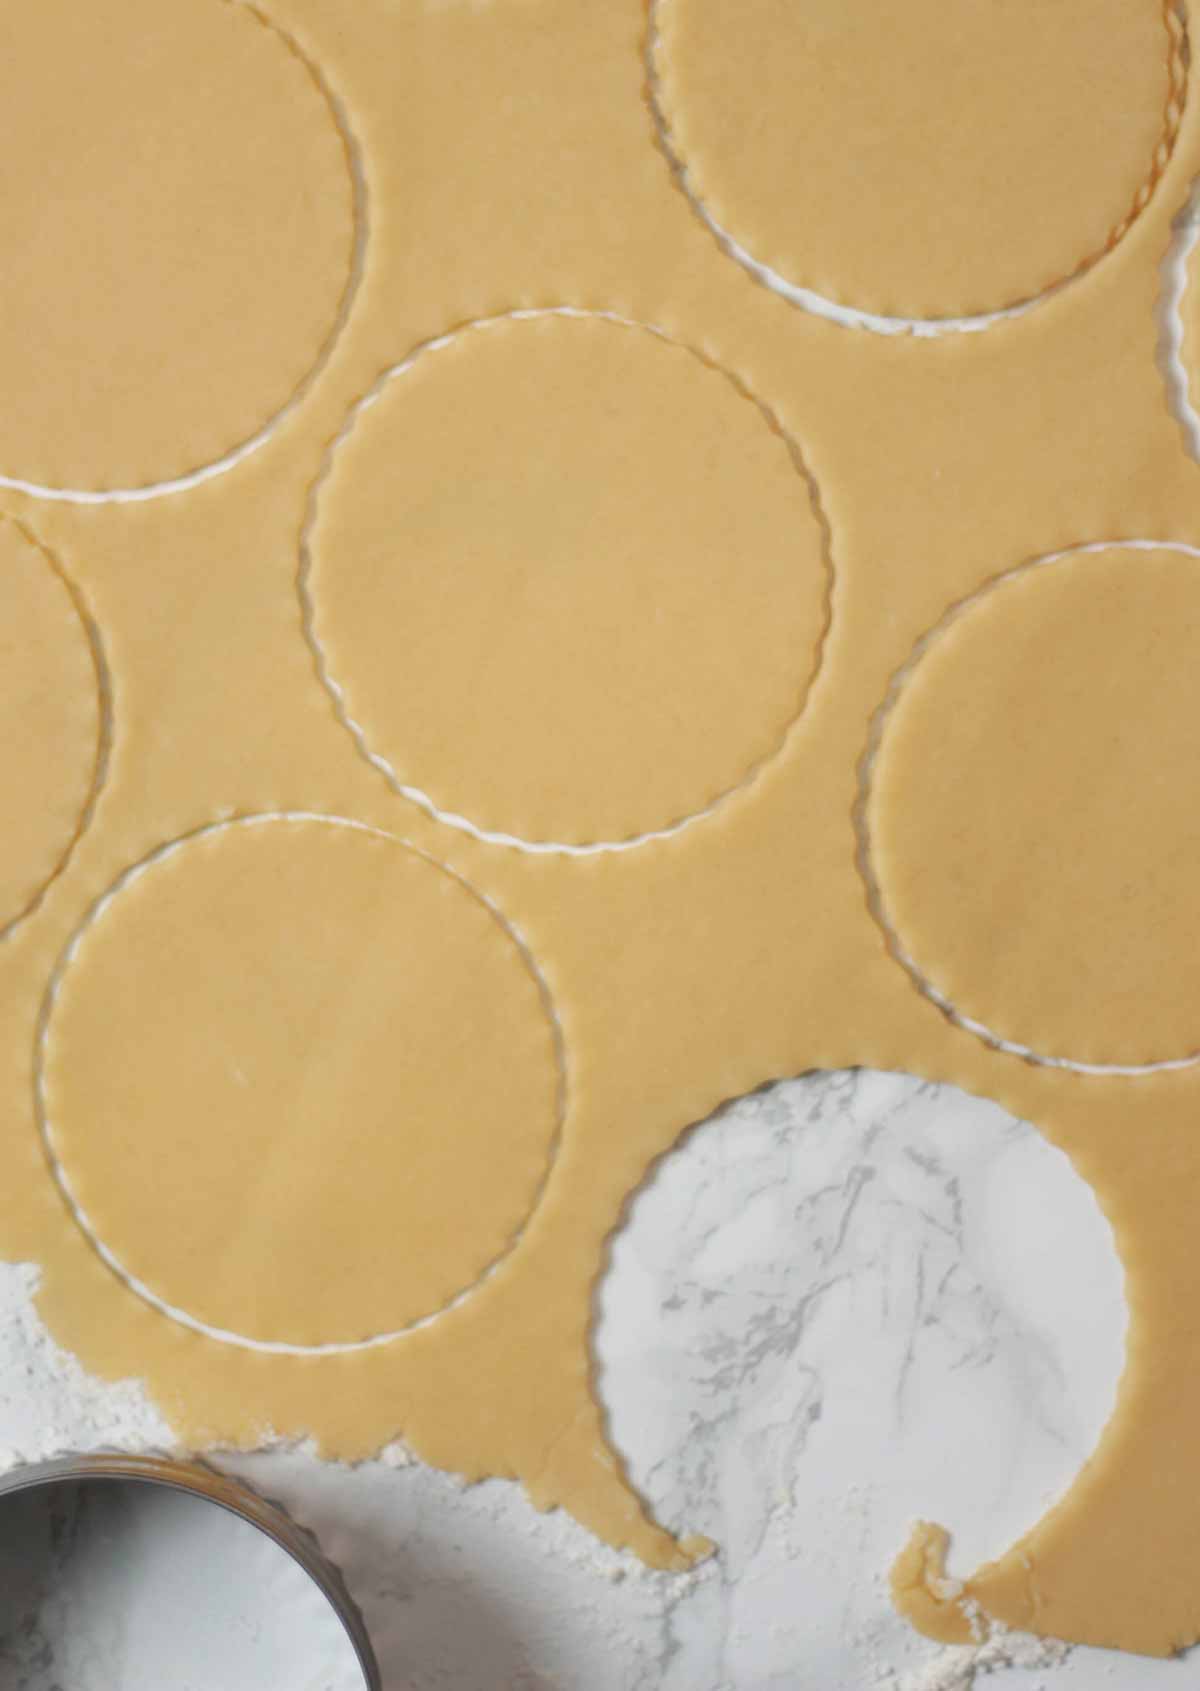 Cutting Circles Out Of The Dough